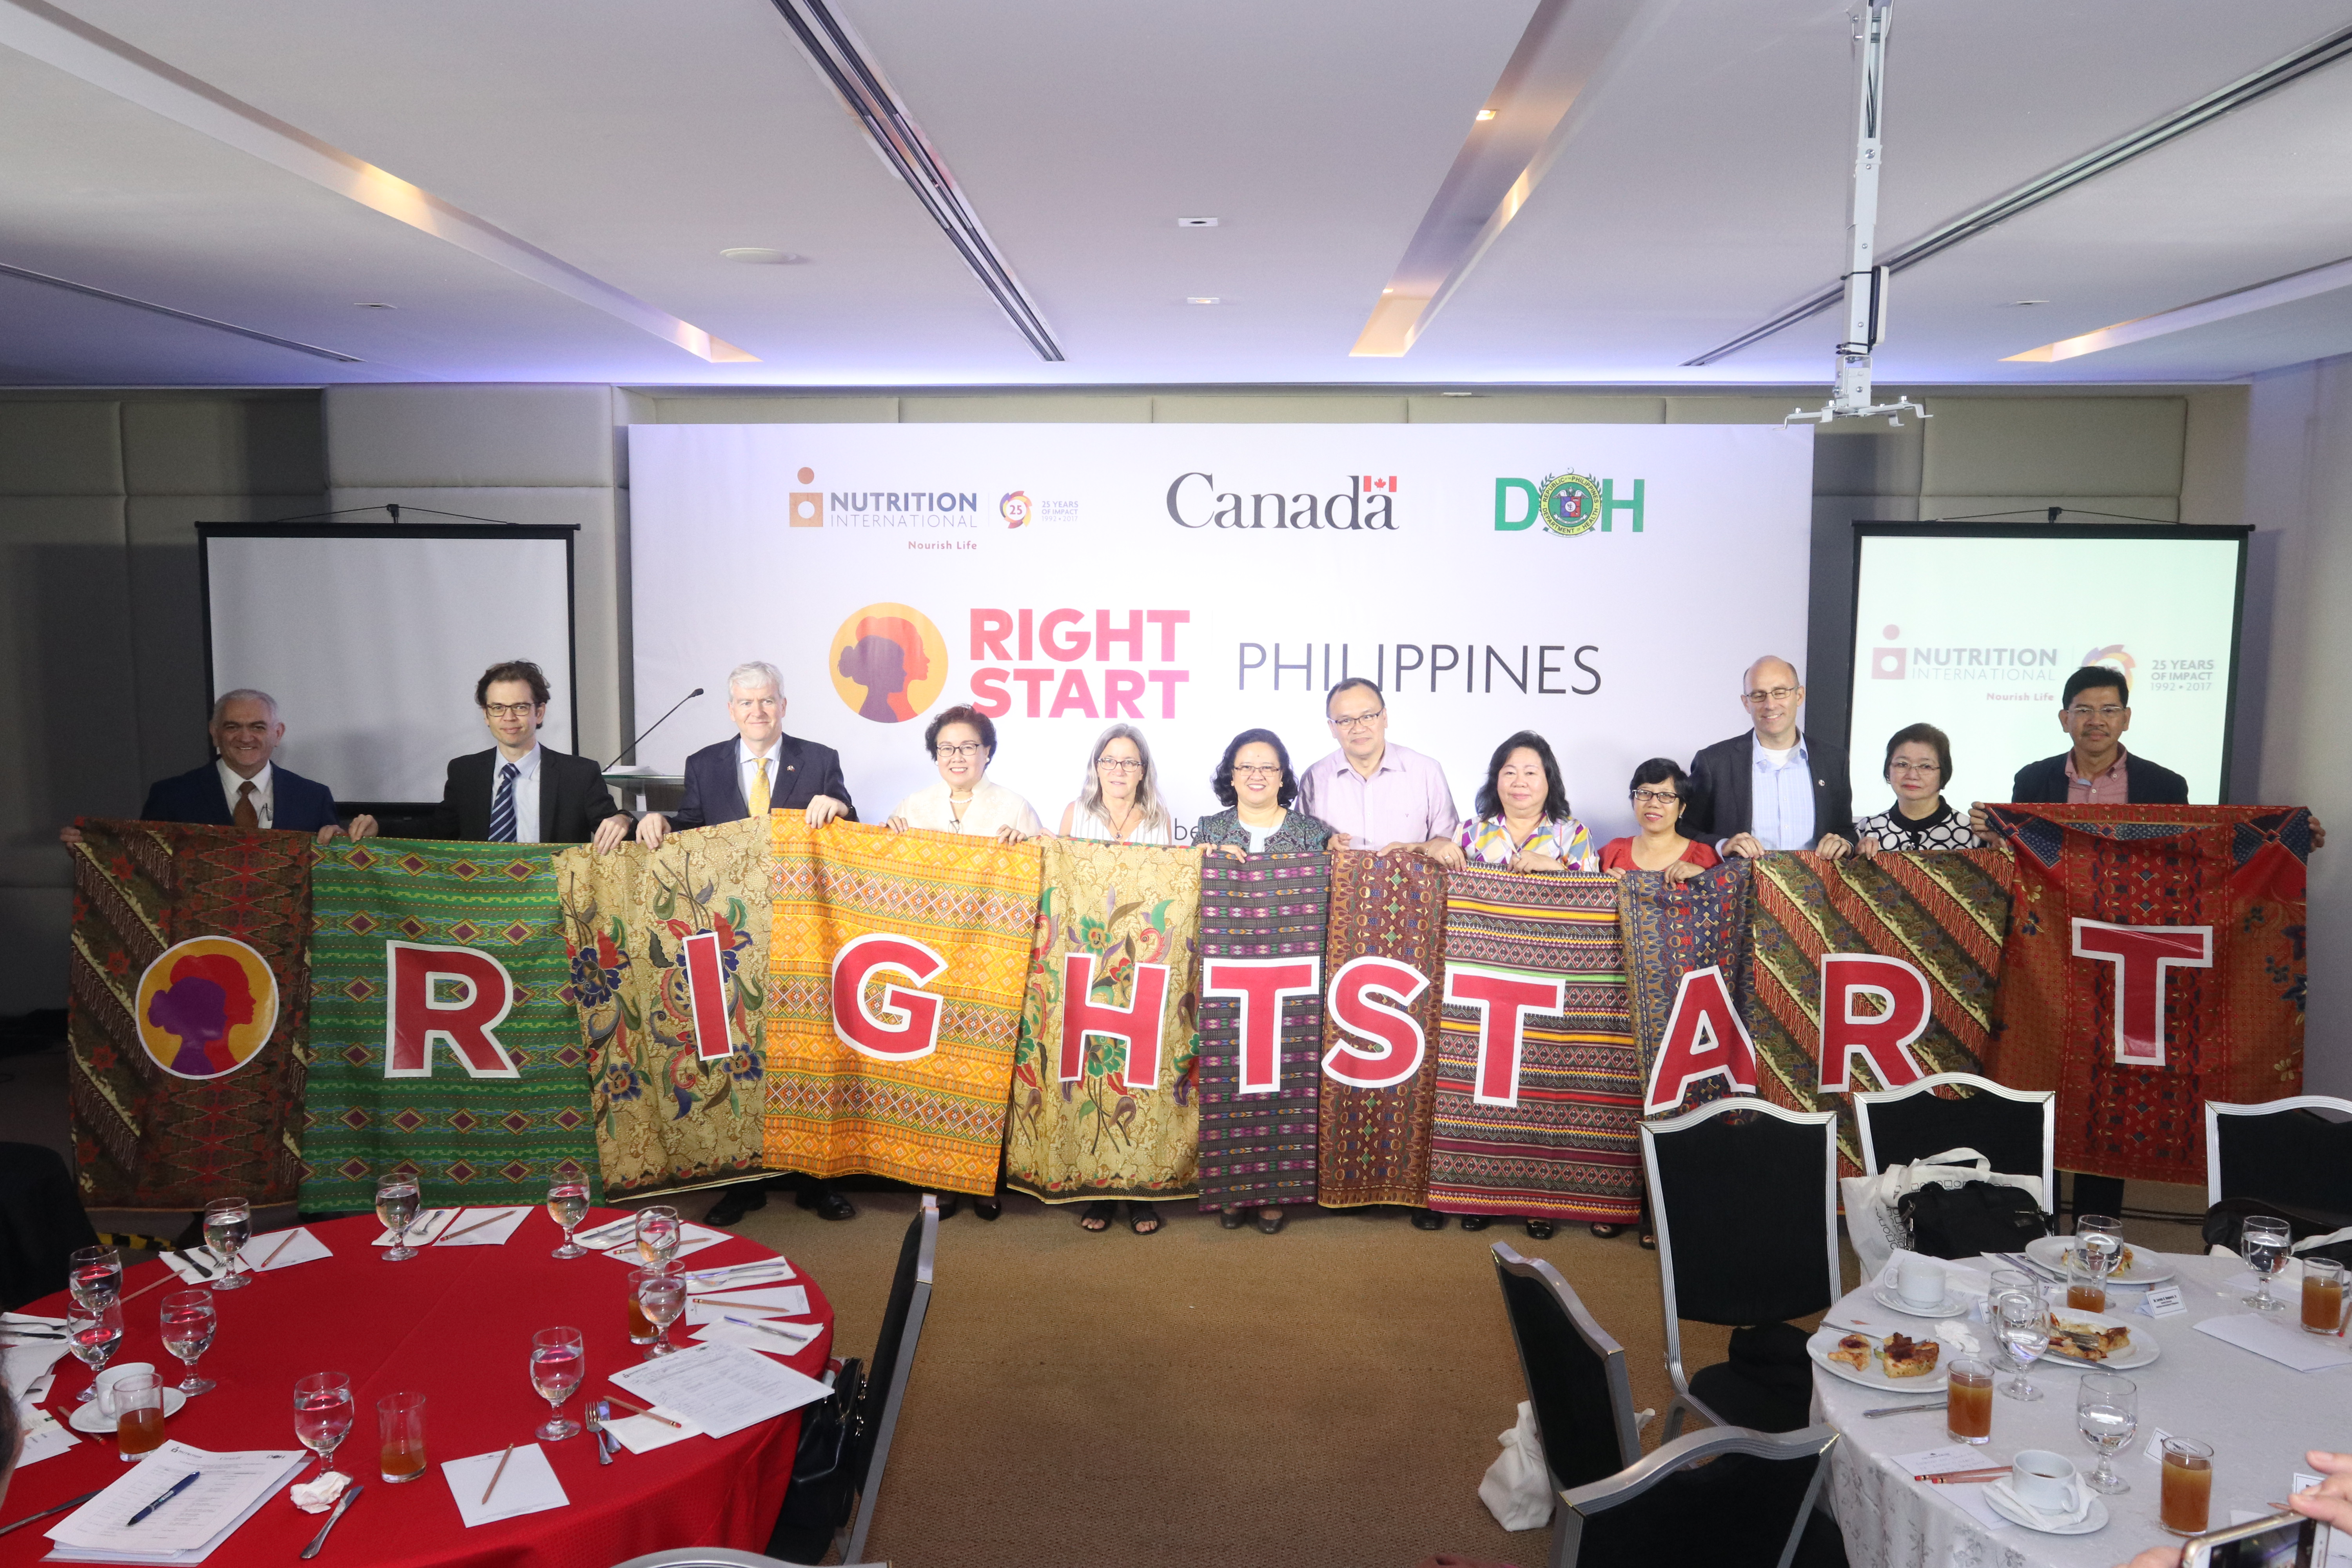 &#8220;Right Start&#8221;, Nutrition International&#8217;s initiative to improve nutrition in the Philippines